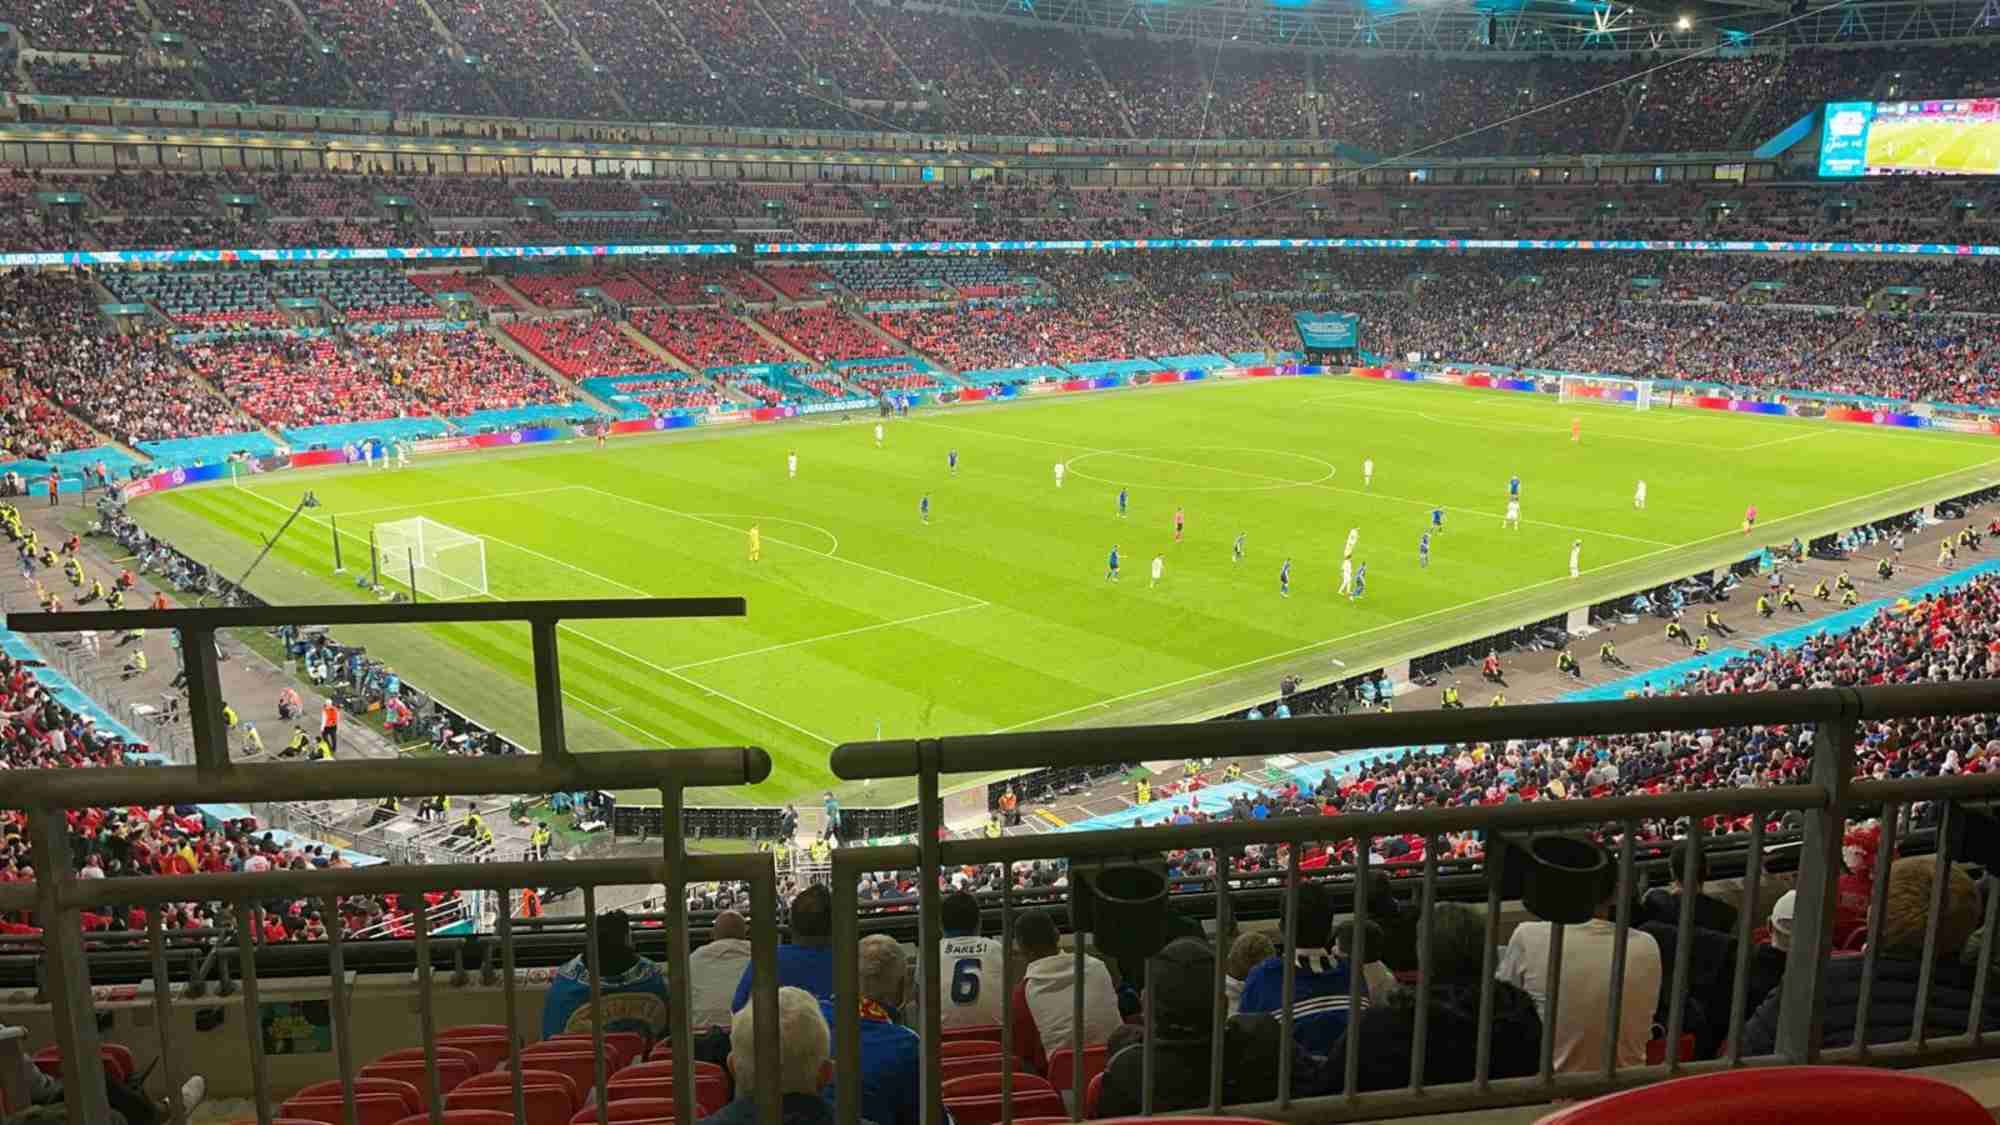 View of Euro 2020 - Italy v Spain at Wembley Stadium from Seat Block 233